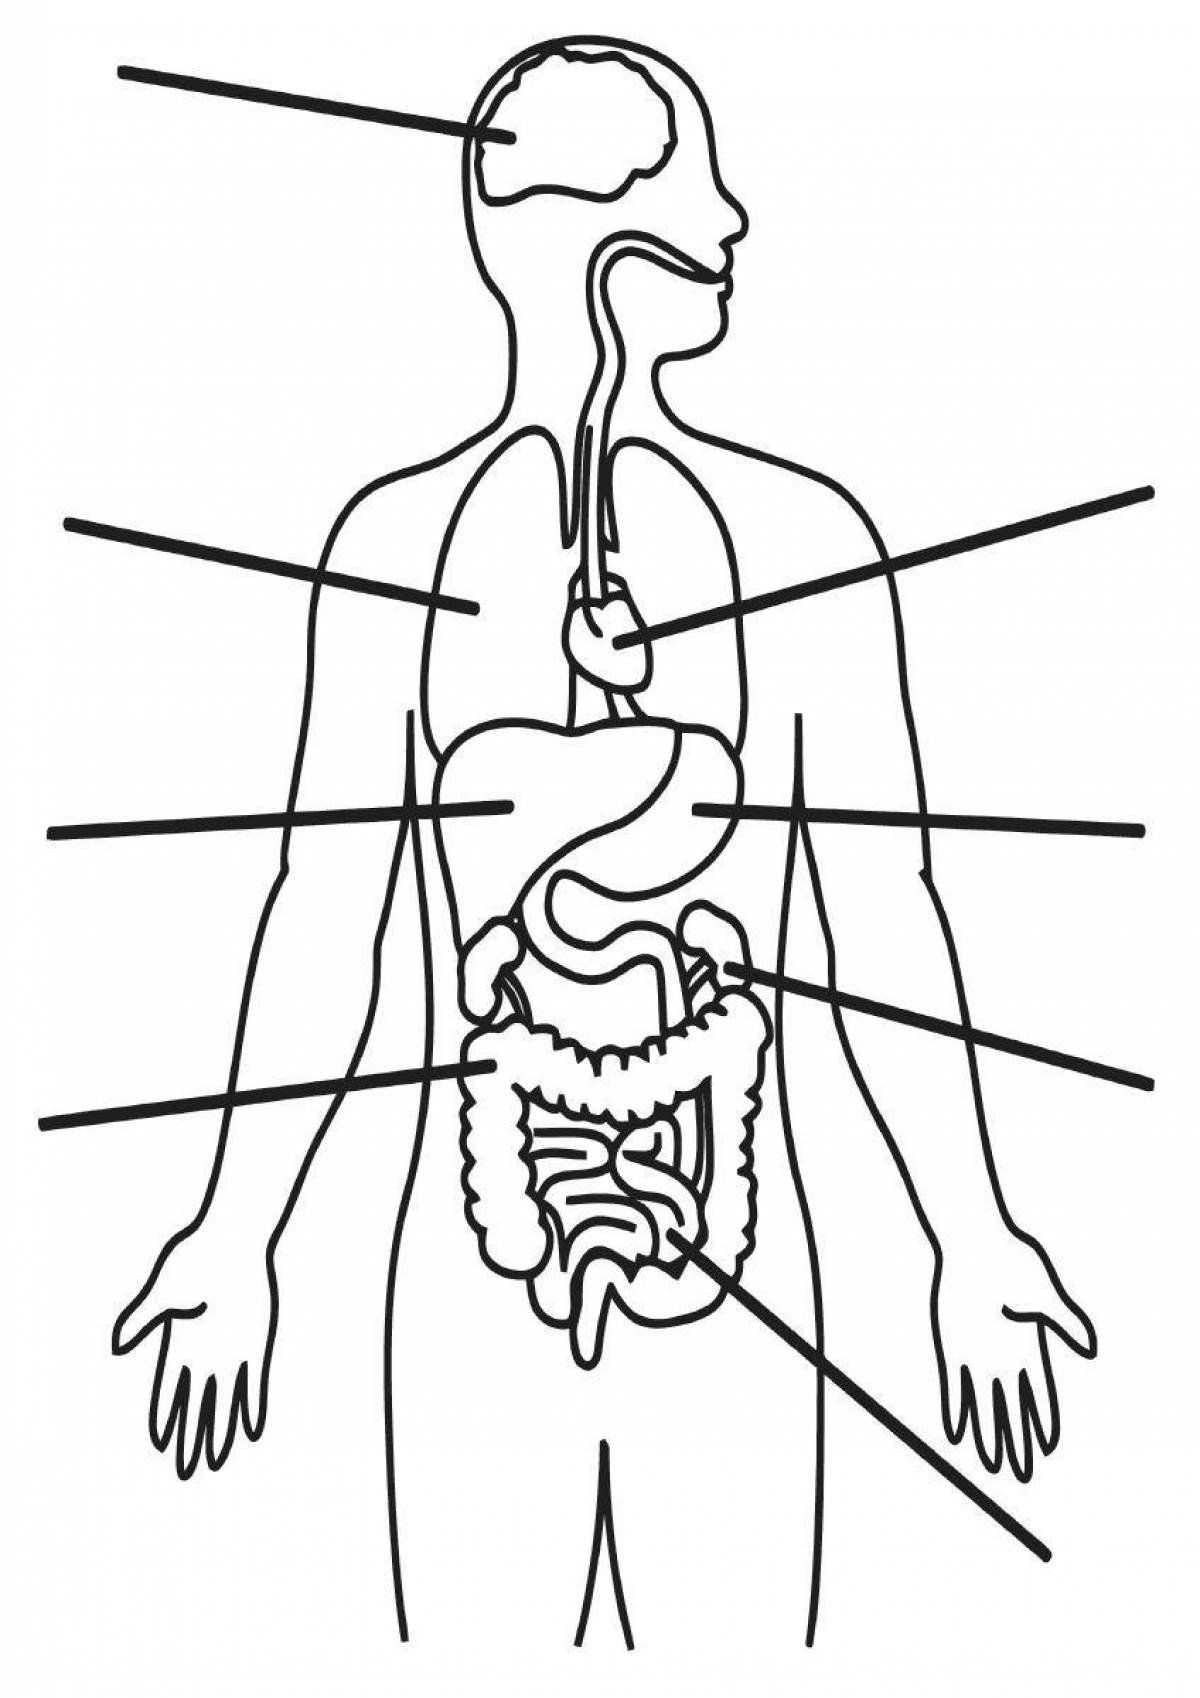 Playful coloring of the structure of the human body Grade 2